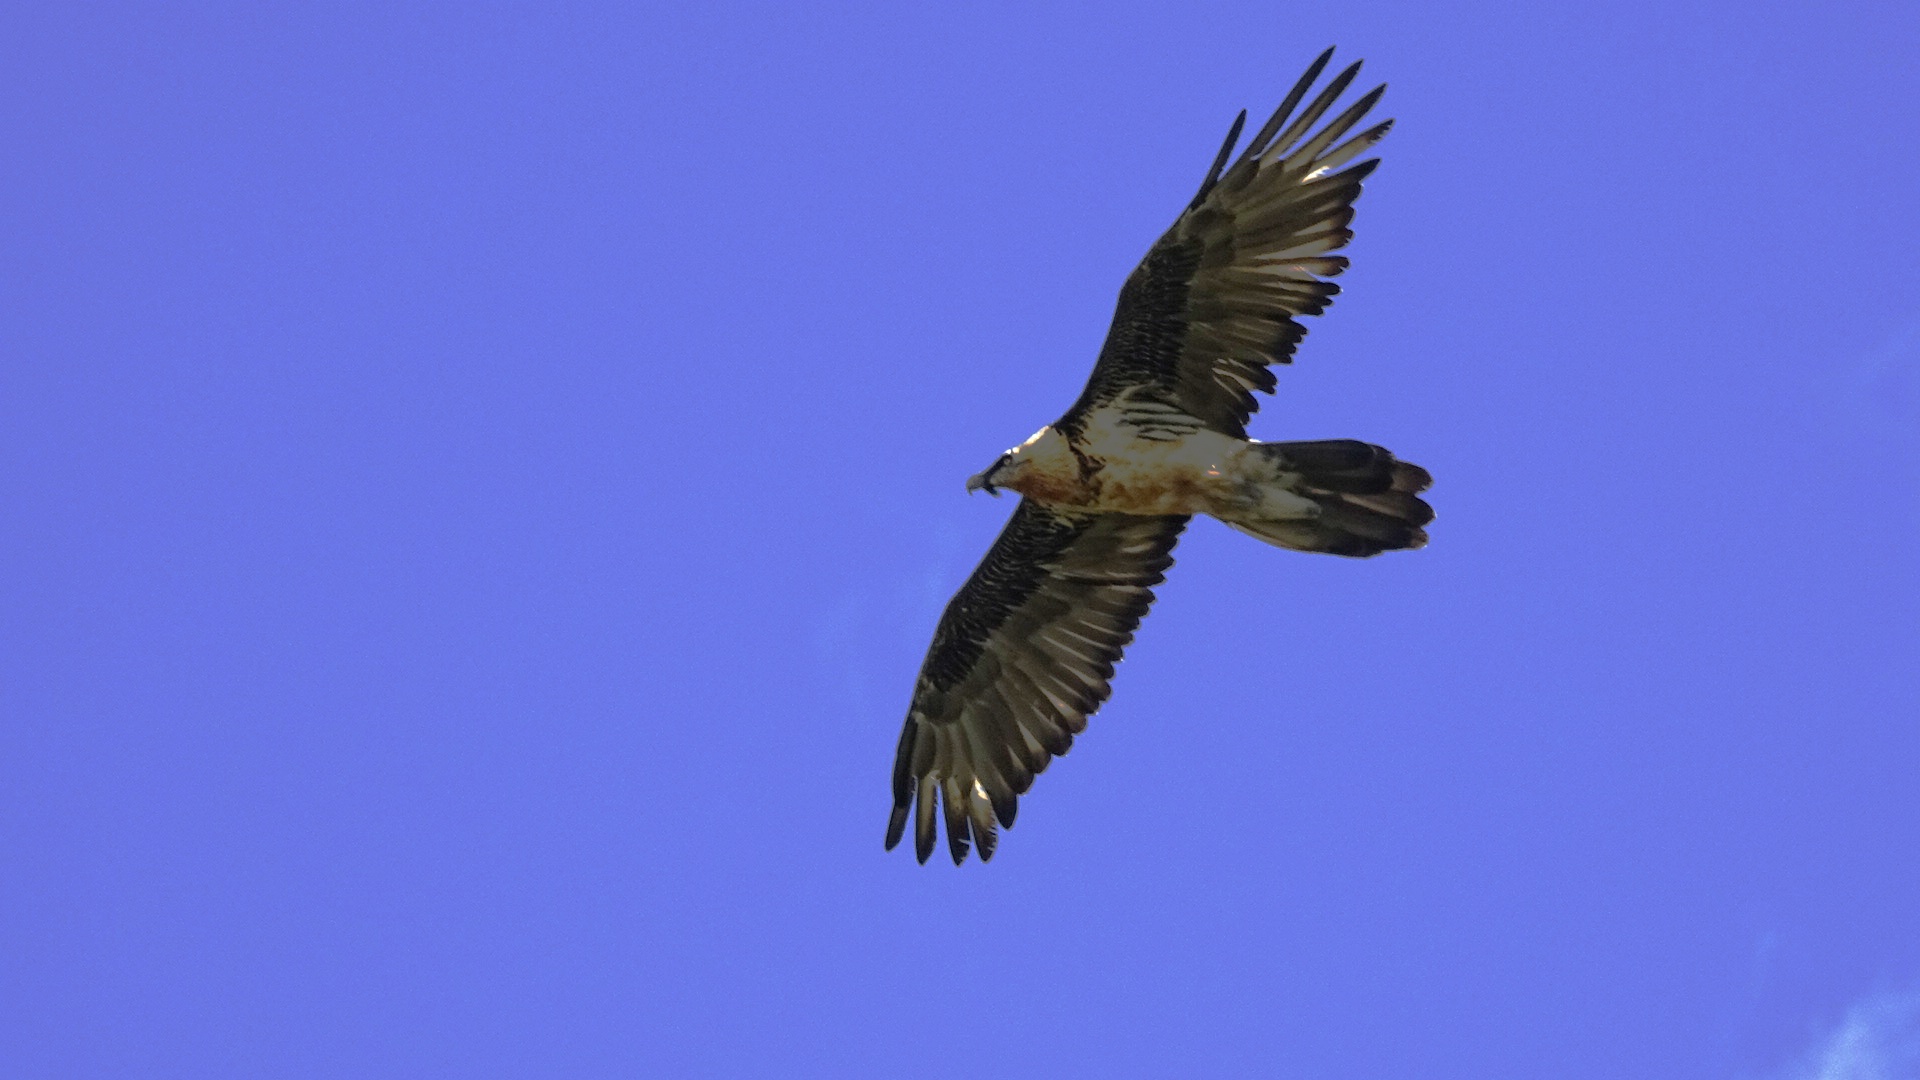 The ( my ) first bearded vulture...